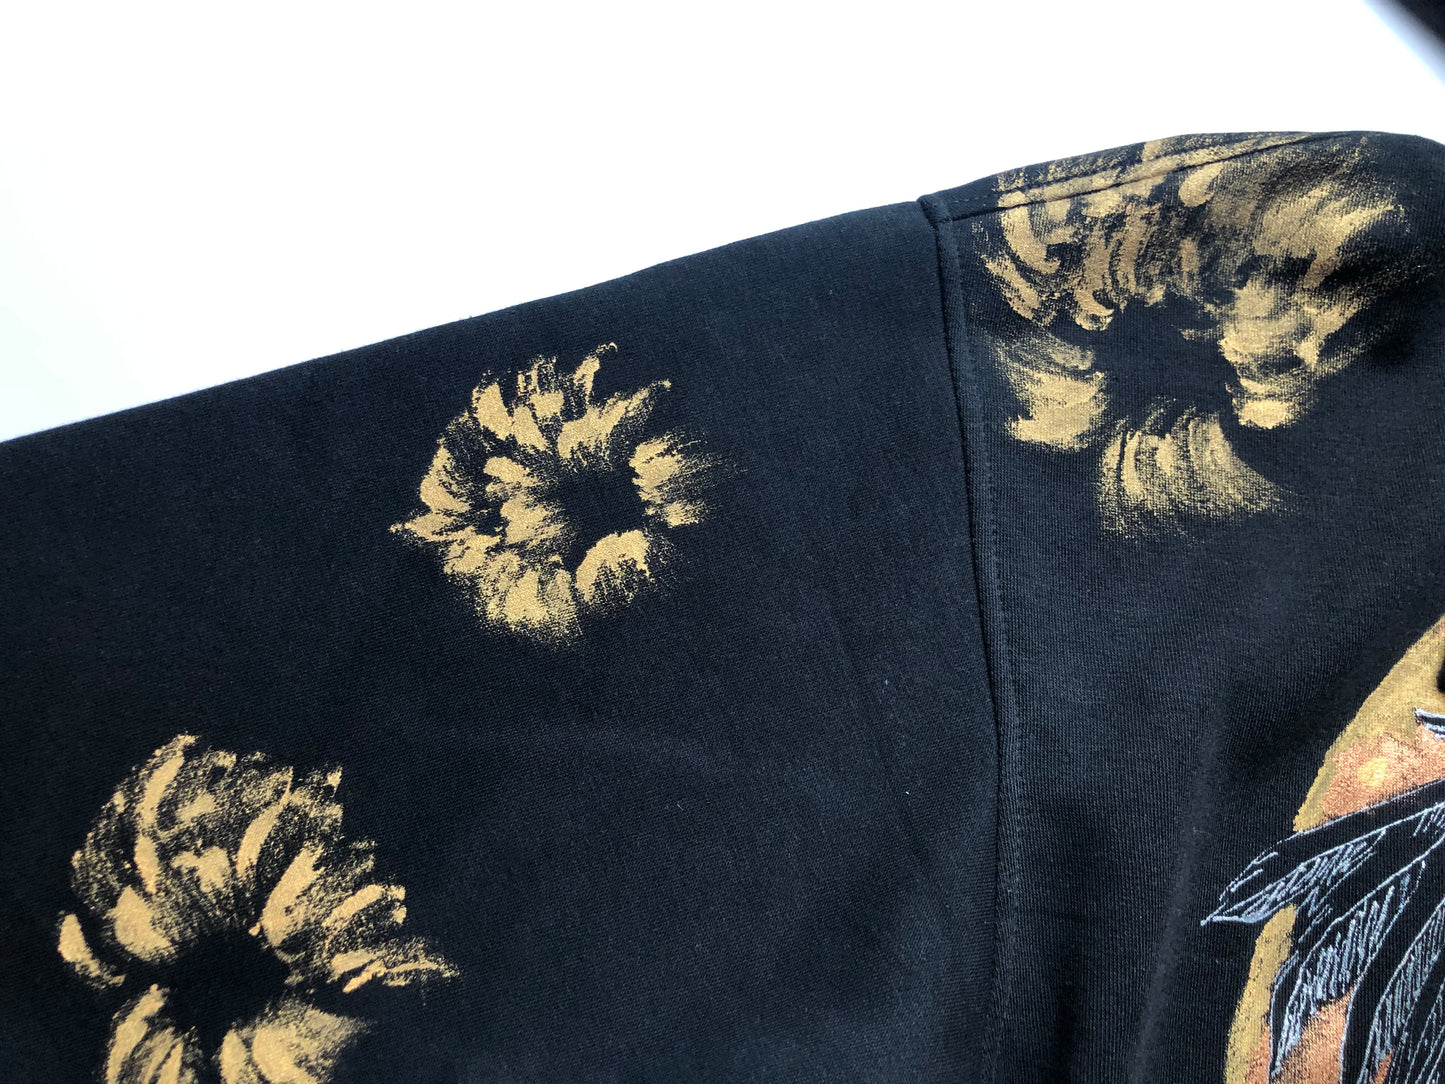 Women's hoodie black gold patterns on the sleeves details